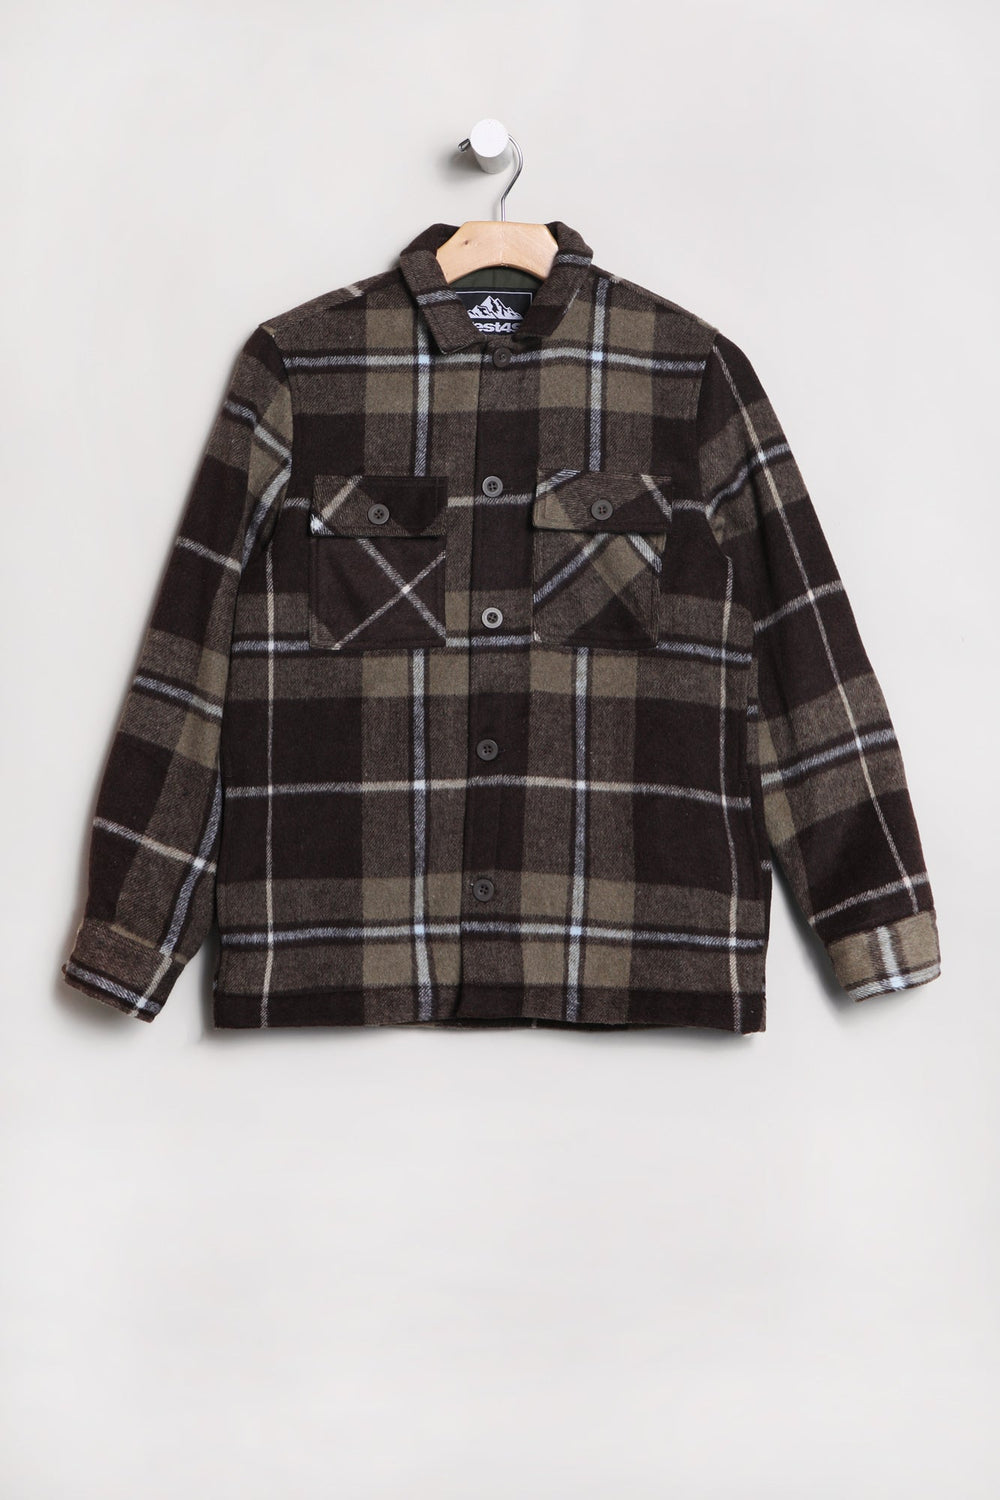 West49 Youth Plaid Shacket Brown